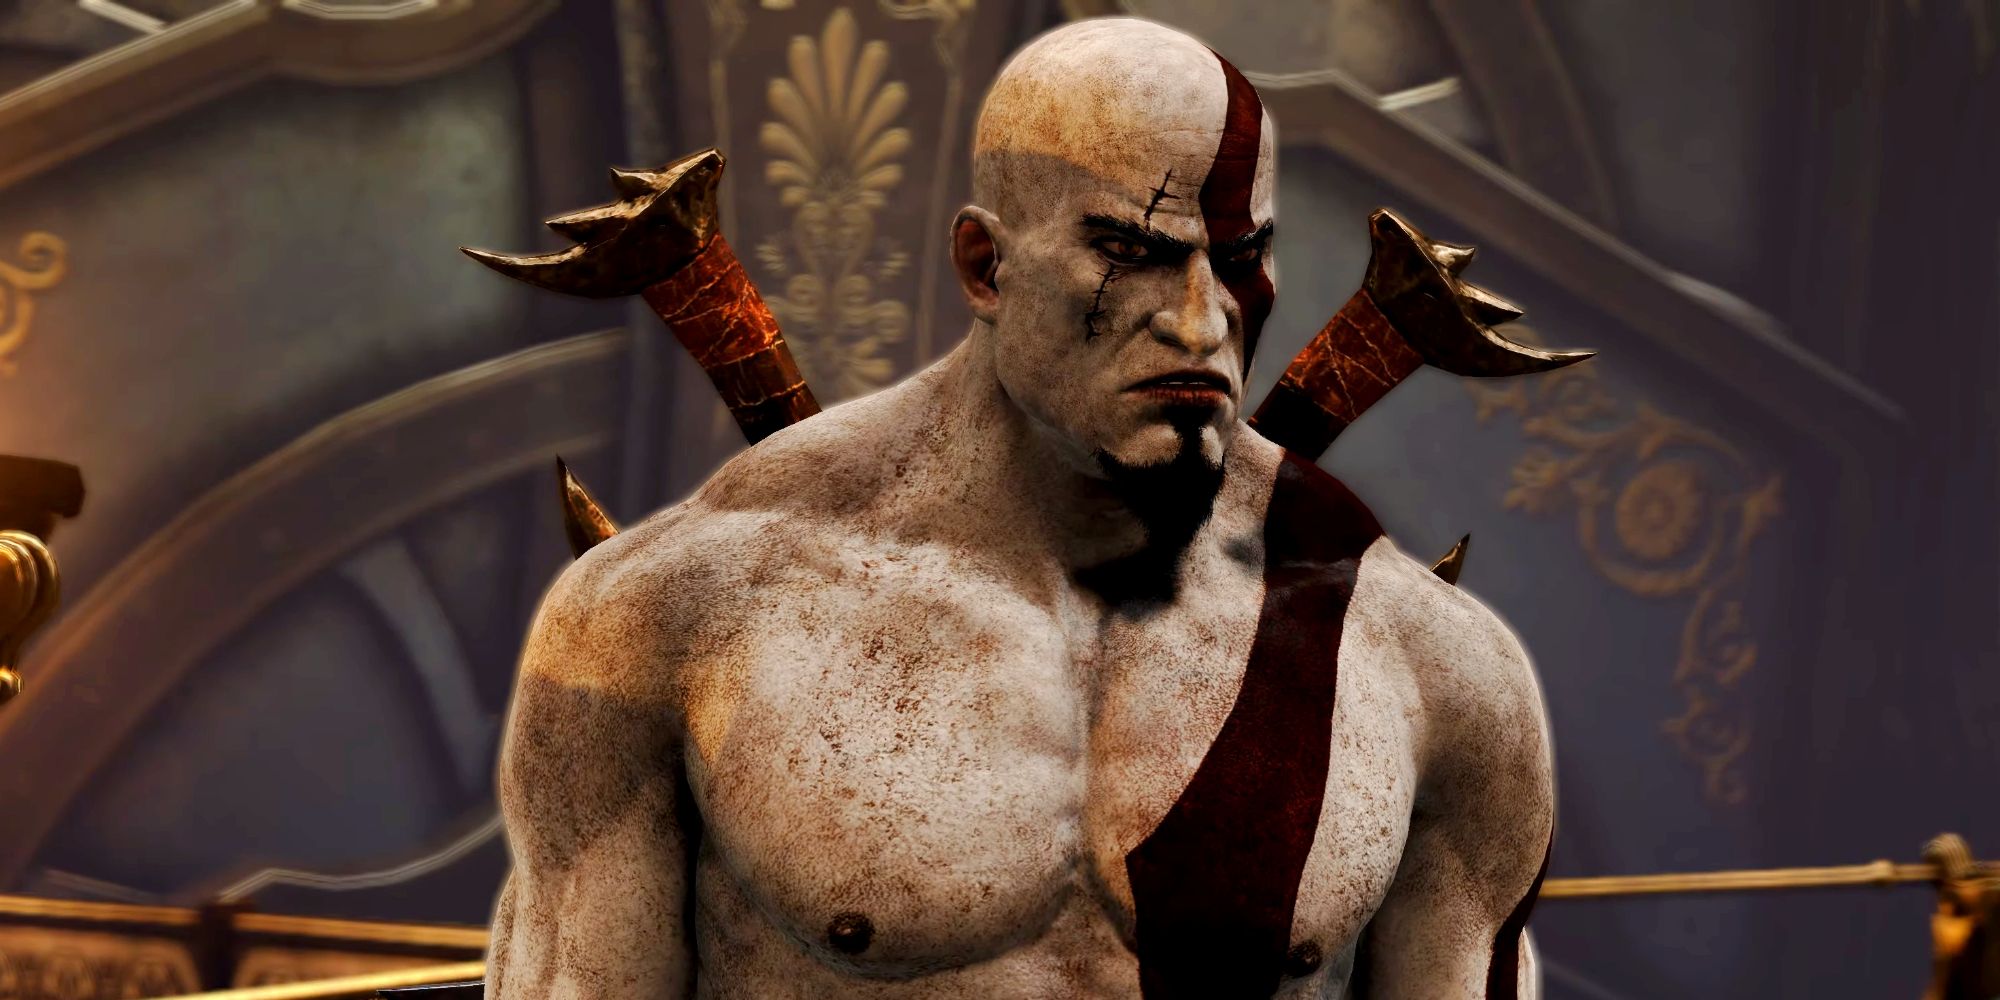 Kratos during a cutscene in God of War: Ascension, with the Blades of Chaos on his back.